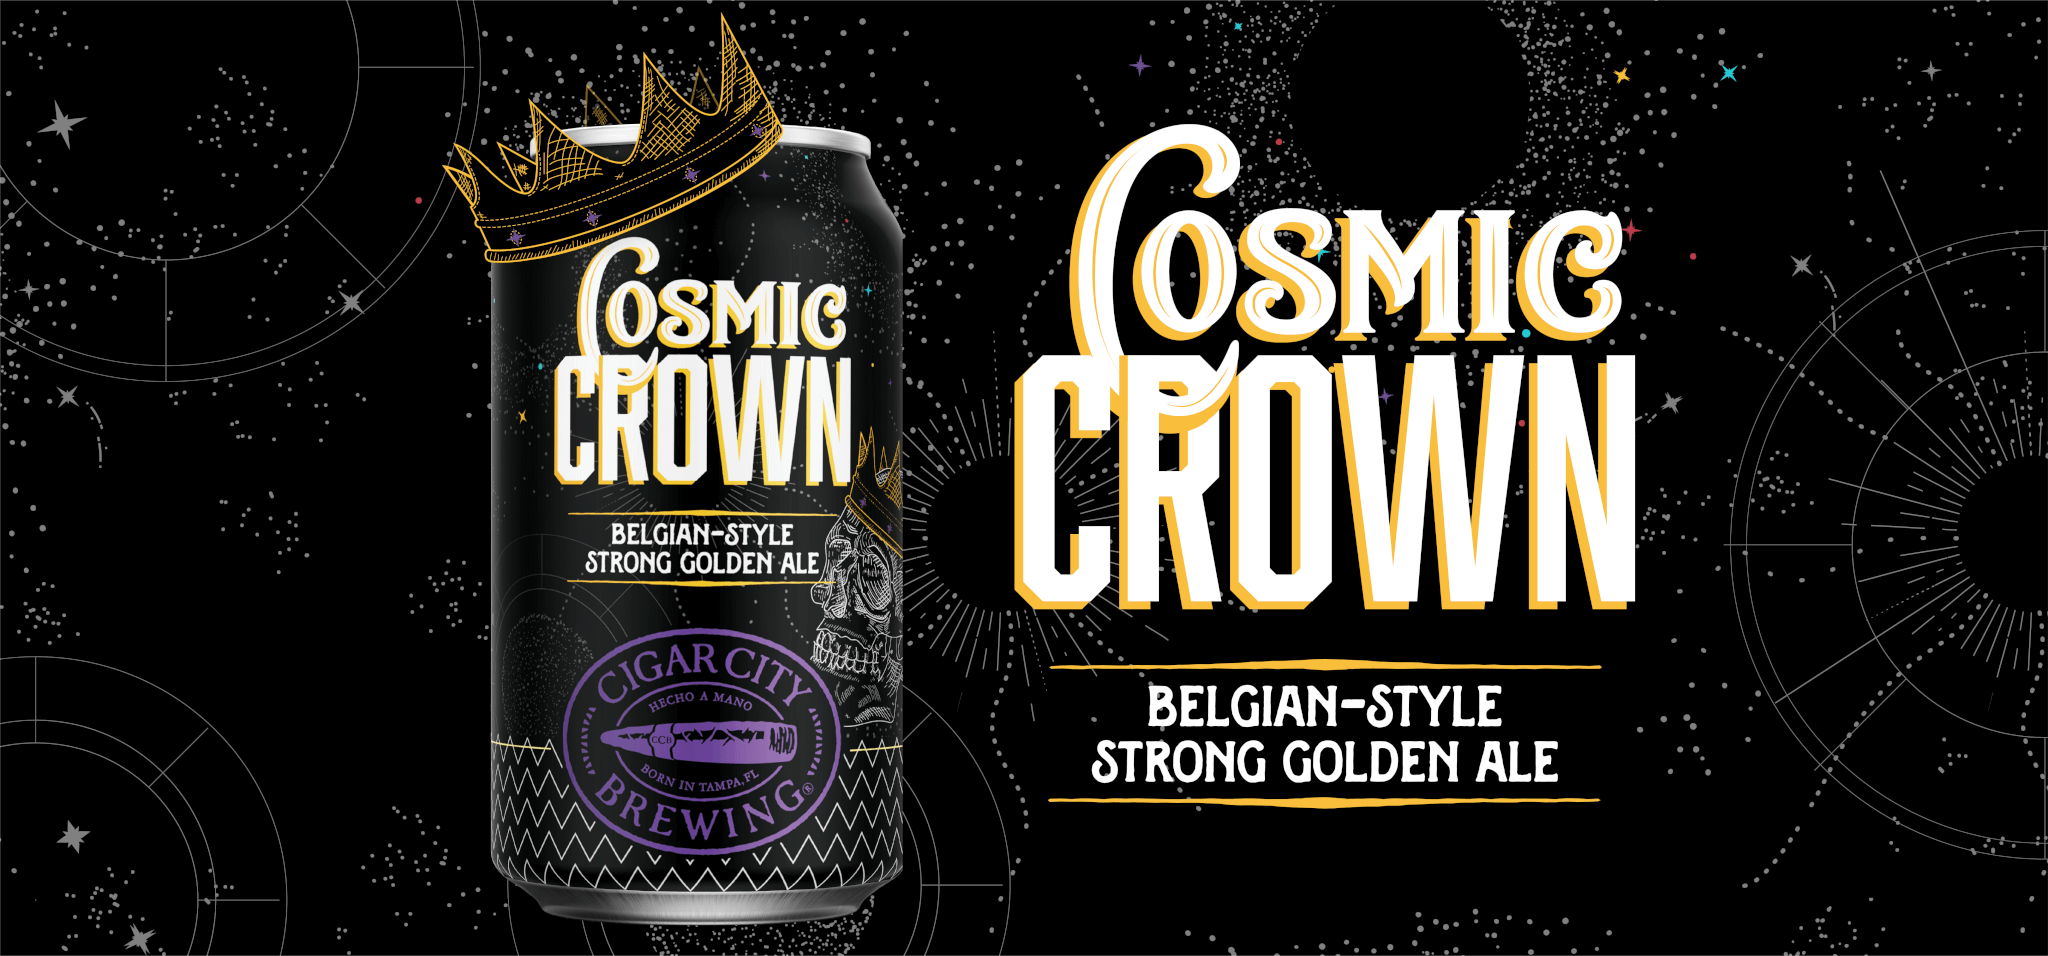 Cigar City Brewing announces the release of Cosmic Crown Belgian-style Strong Golden Ale